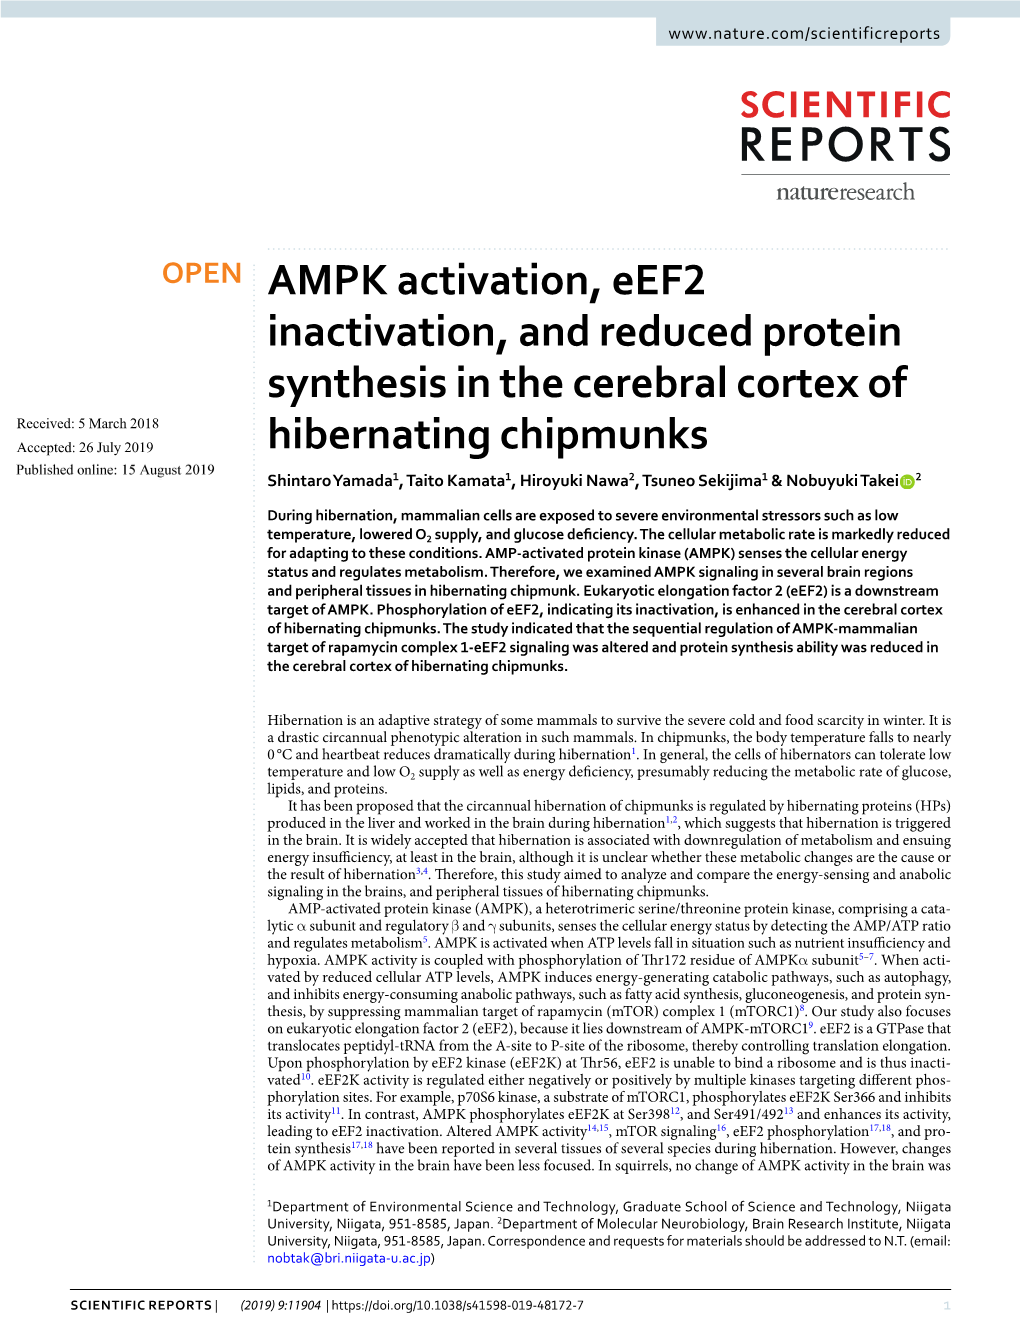 AMPK Activation, Eef2 Inactivation, and Reduced Protein Synthesis In